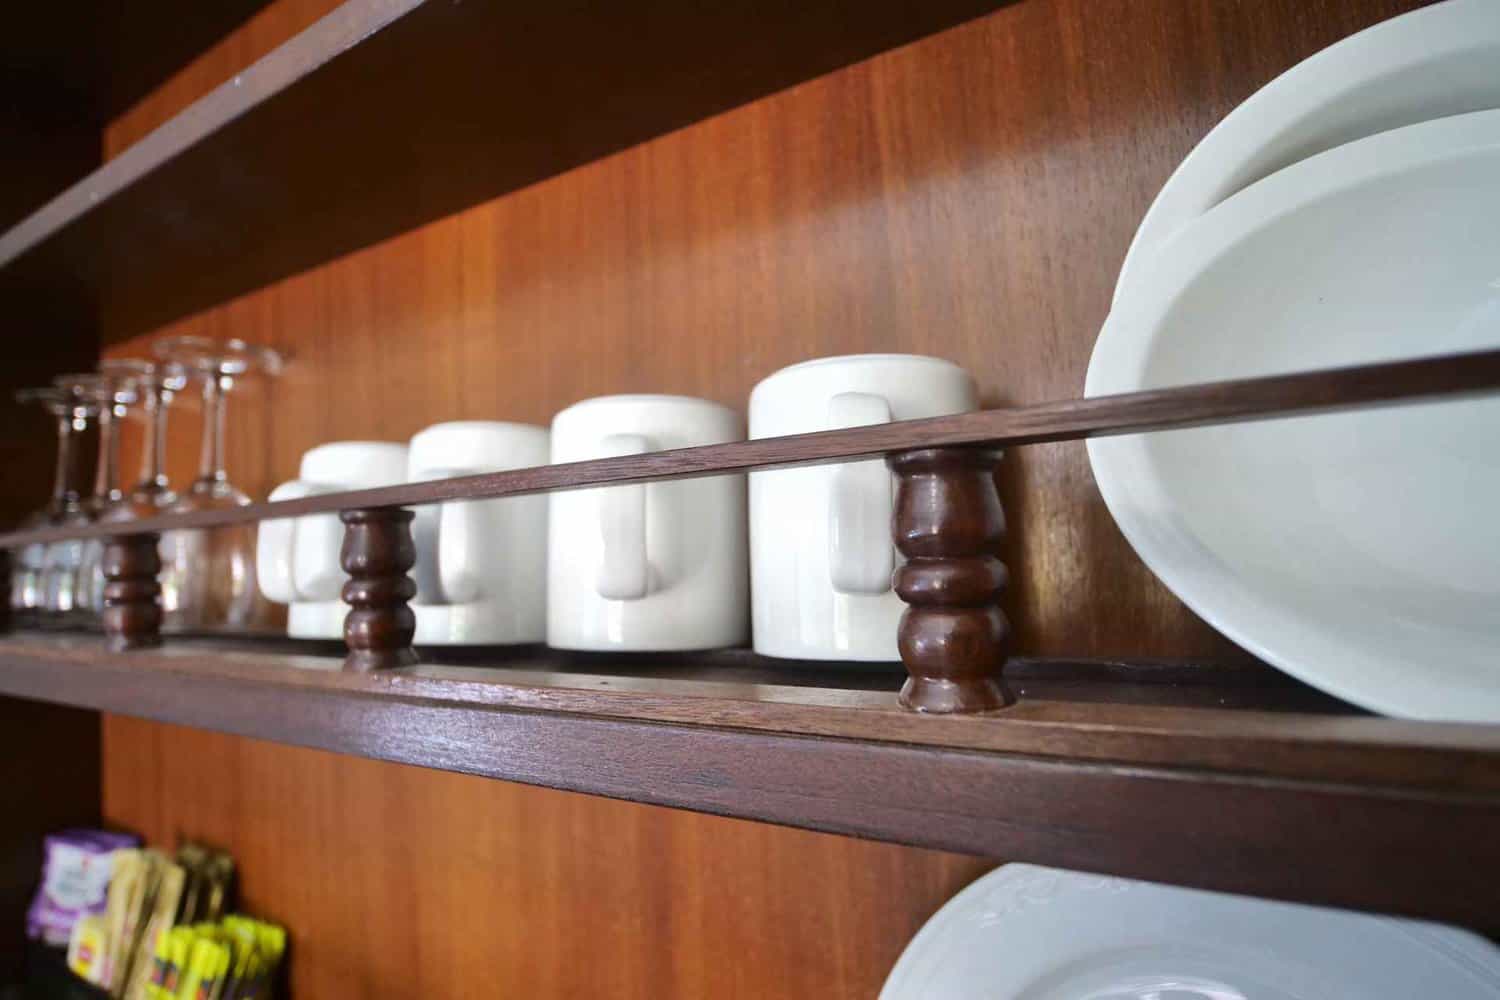 Close-up of a wooden shelf in a hotel room, neatly arranged with white porcelain coffee mugs and plates, alongside clear glass stemware, set against a rich, dark wood background.